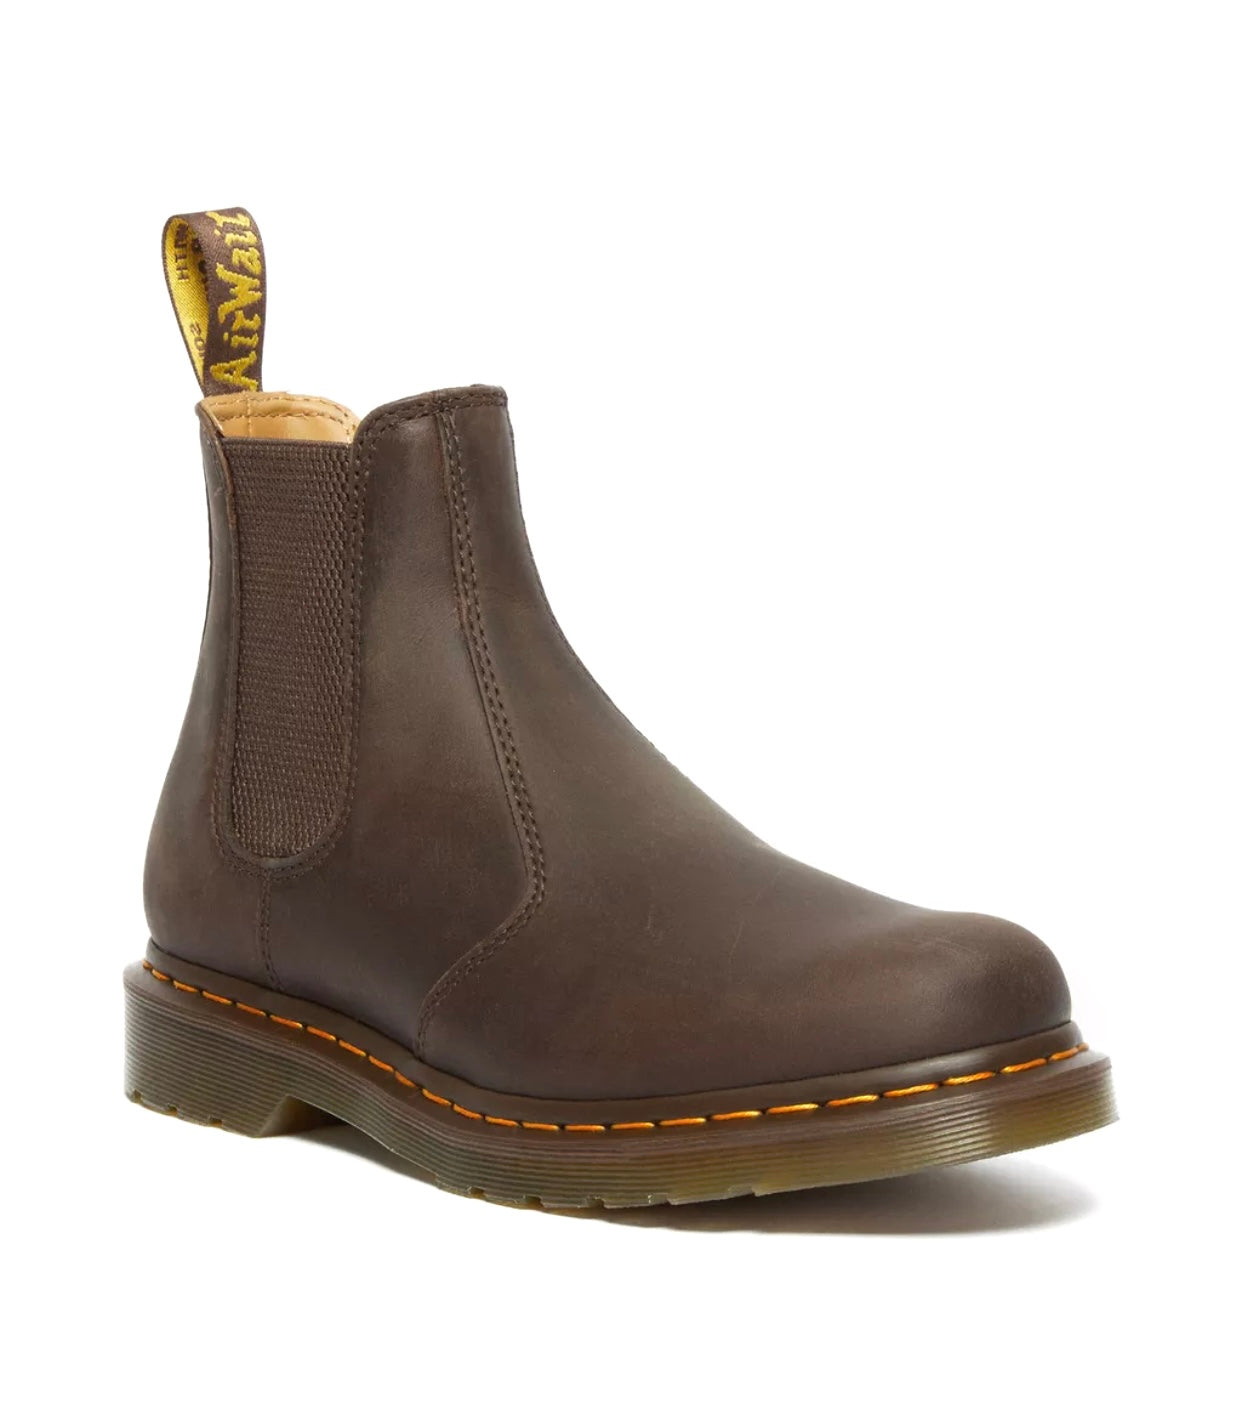 Dr. Martens 2976 Dark Brown Crazy Horse Yellow Stitch Chelsea Elastic Sided Boot